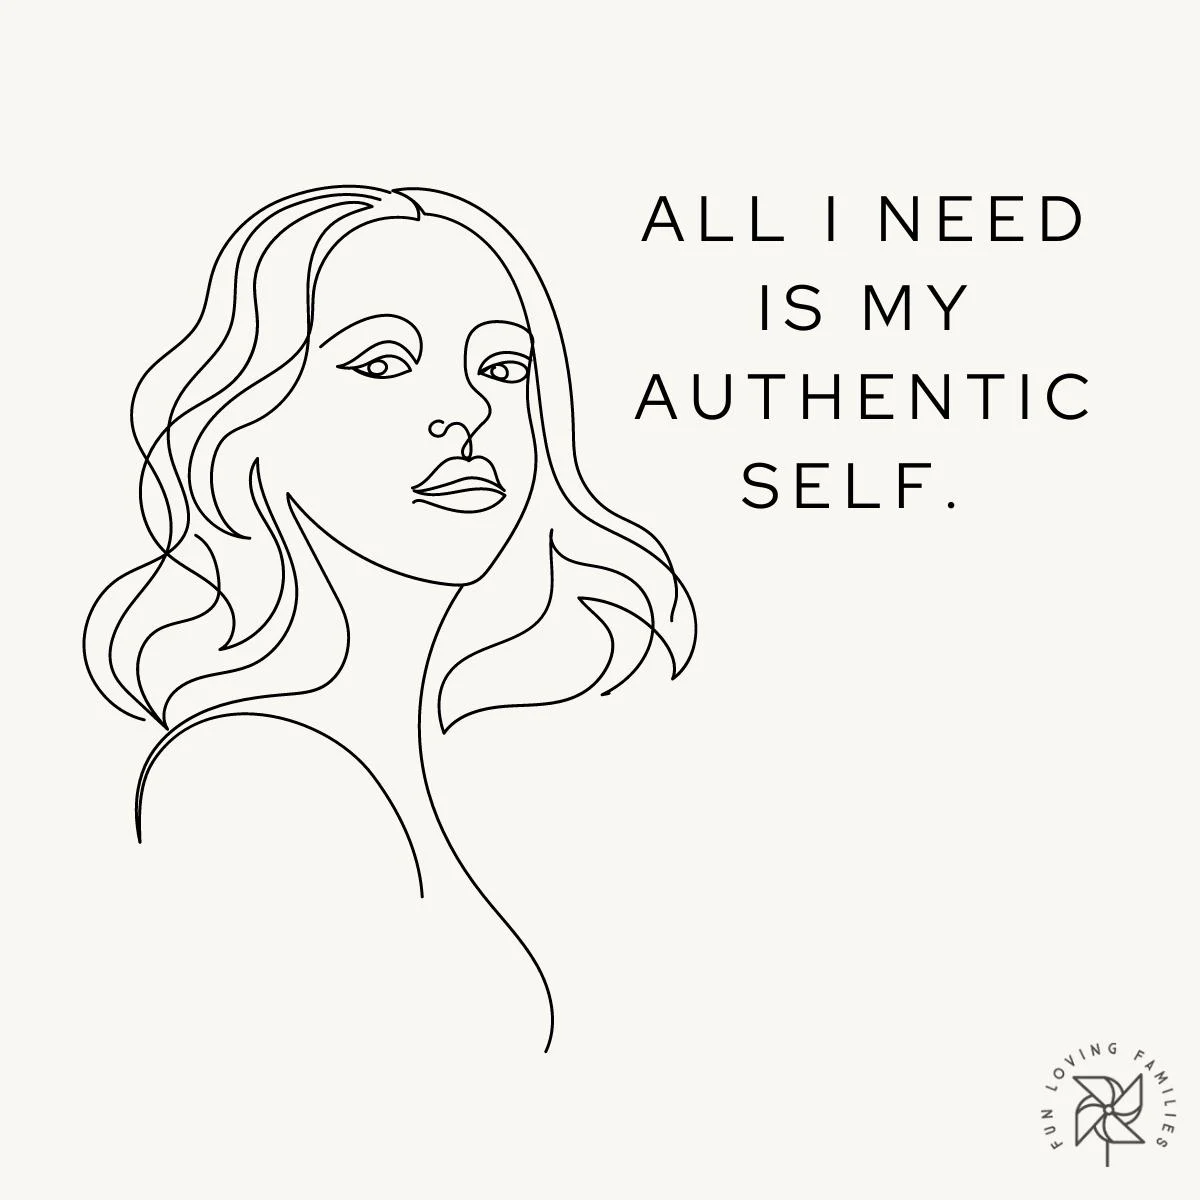 All I need is my authentic self affirmation